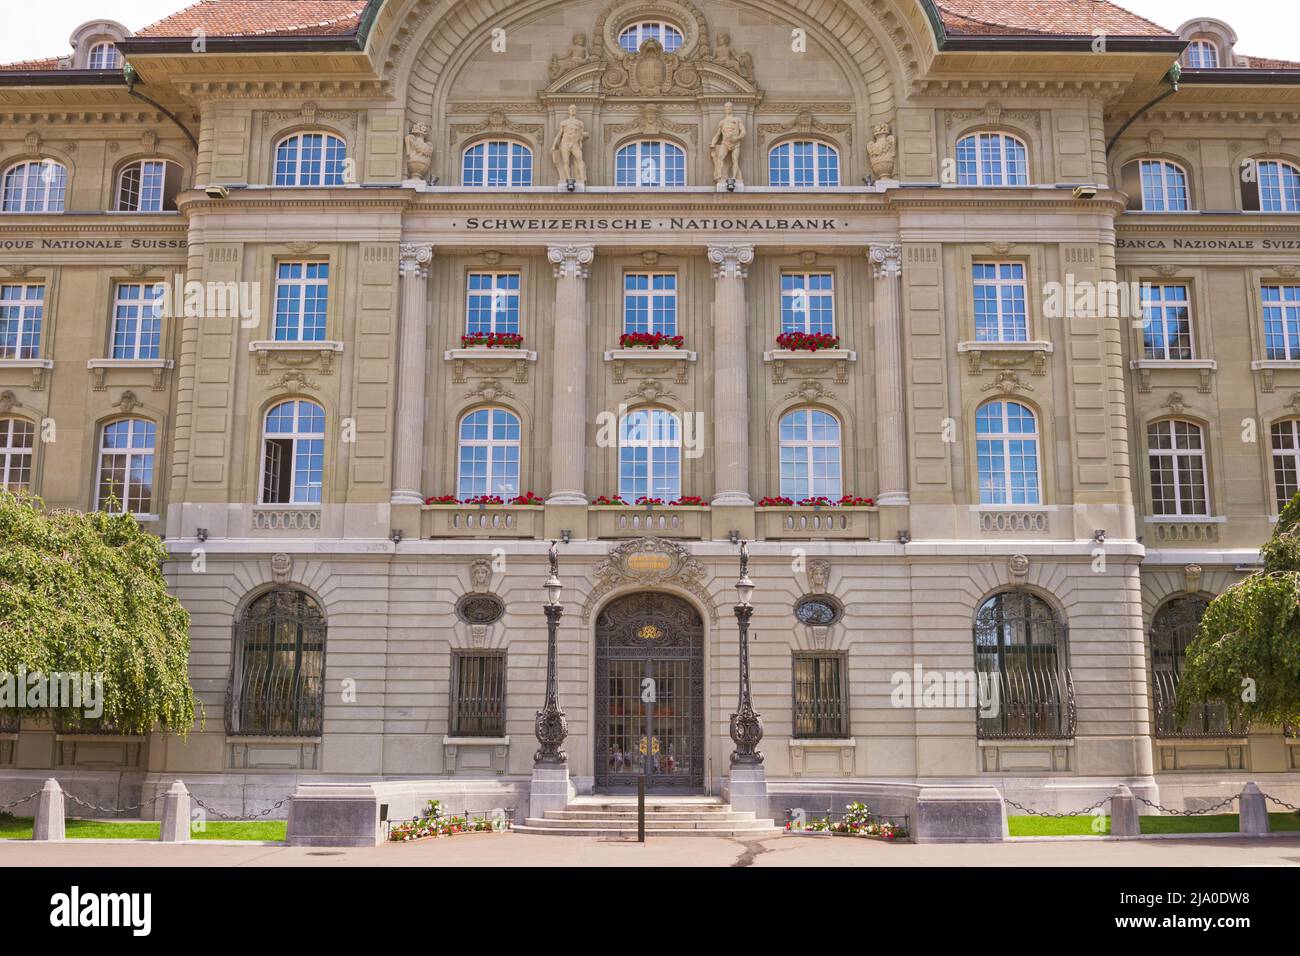 Bern, Switzerland - August 13, 2020: Facade of the headquarters of the Swiss national bank in Bern. Stock Photo